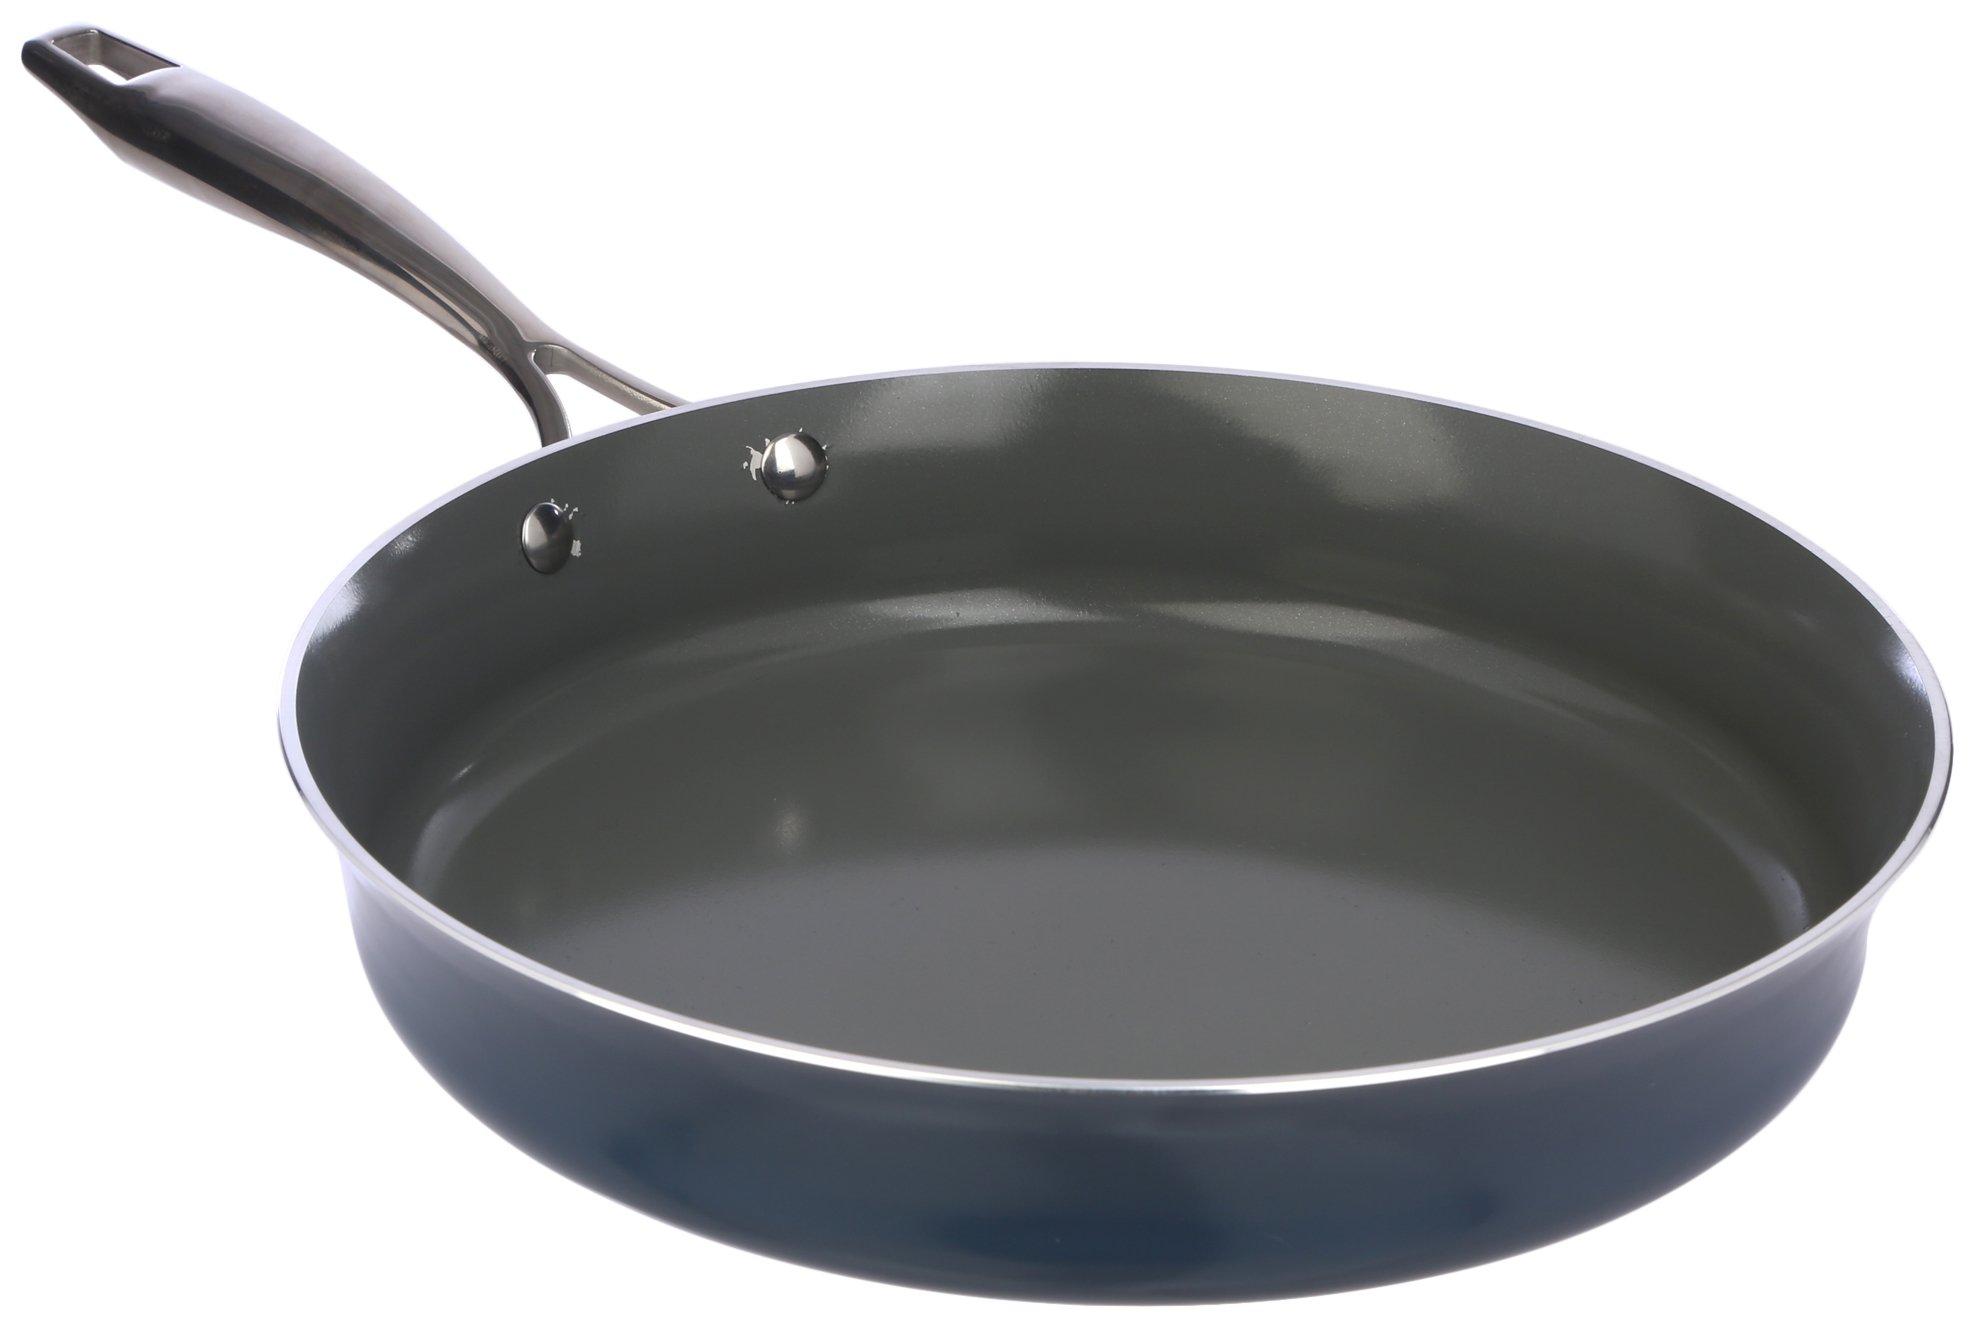 Zest Kitchen and Home 12 in. Ceramic Non-Stick Frying Pan